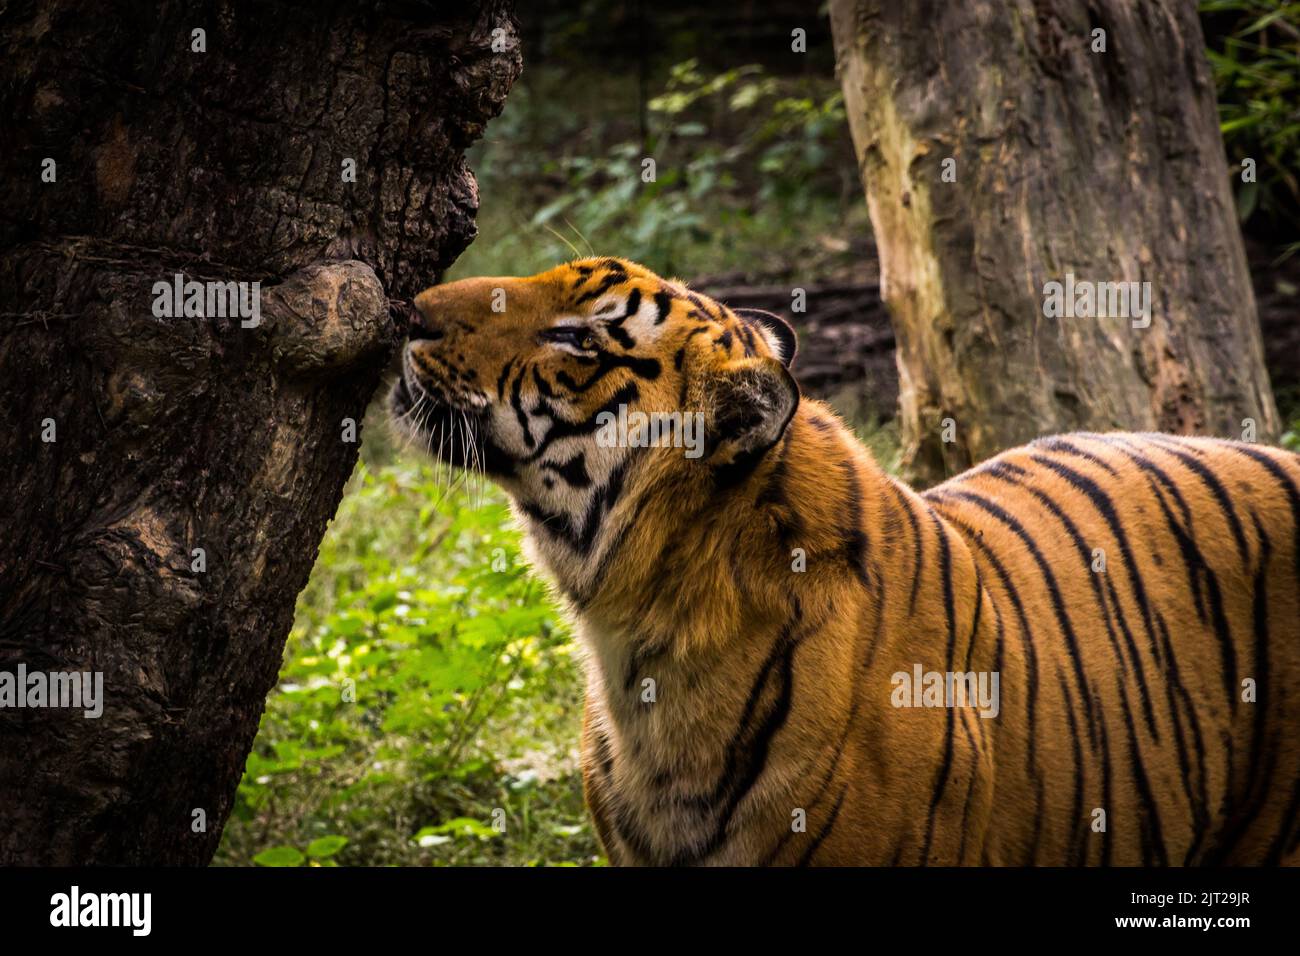 A tiger sniffing on a tree trunk Stock Photo